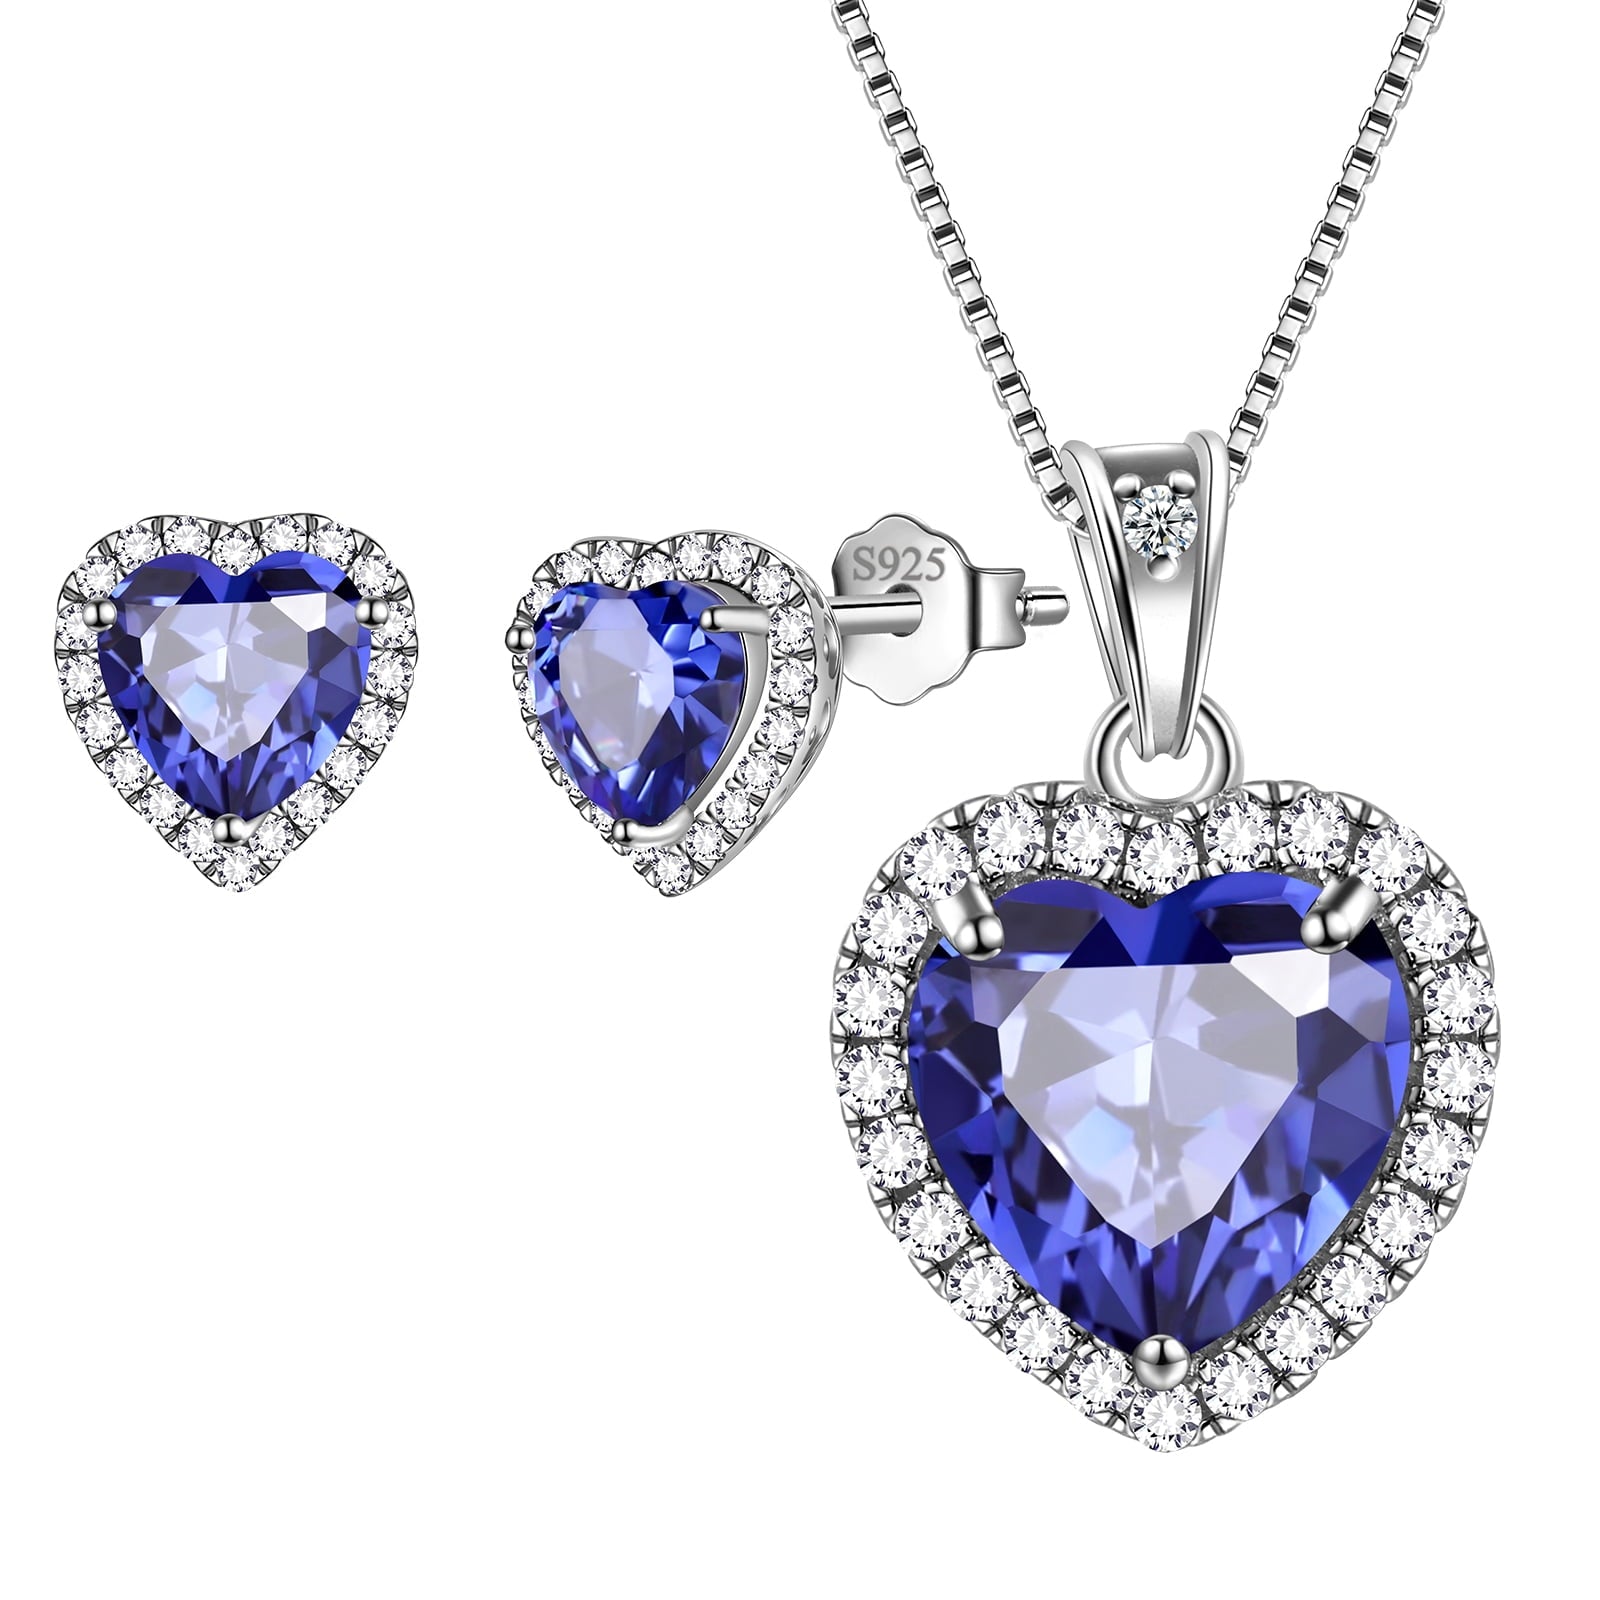 Blue Heart Jewelry Sets for Women, Tanzanite December Birthstone Jewelry Set Necklace Earrings 925 Sterling Silver Jewelry Girls Birthday Valentine's Day Gifts